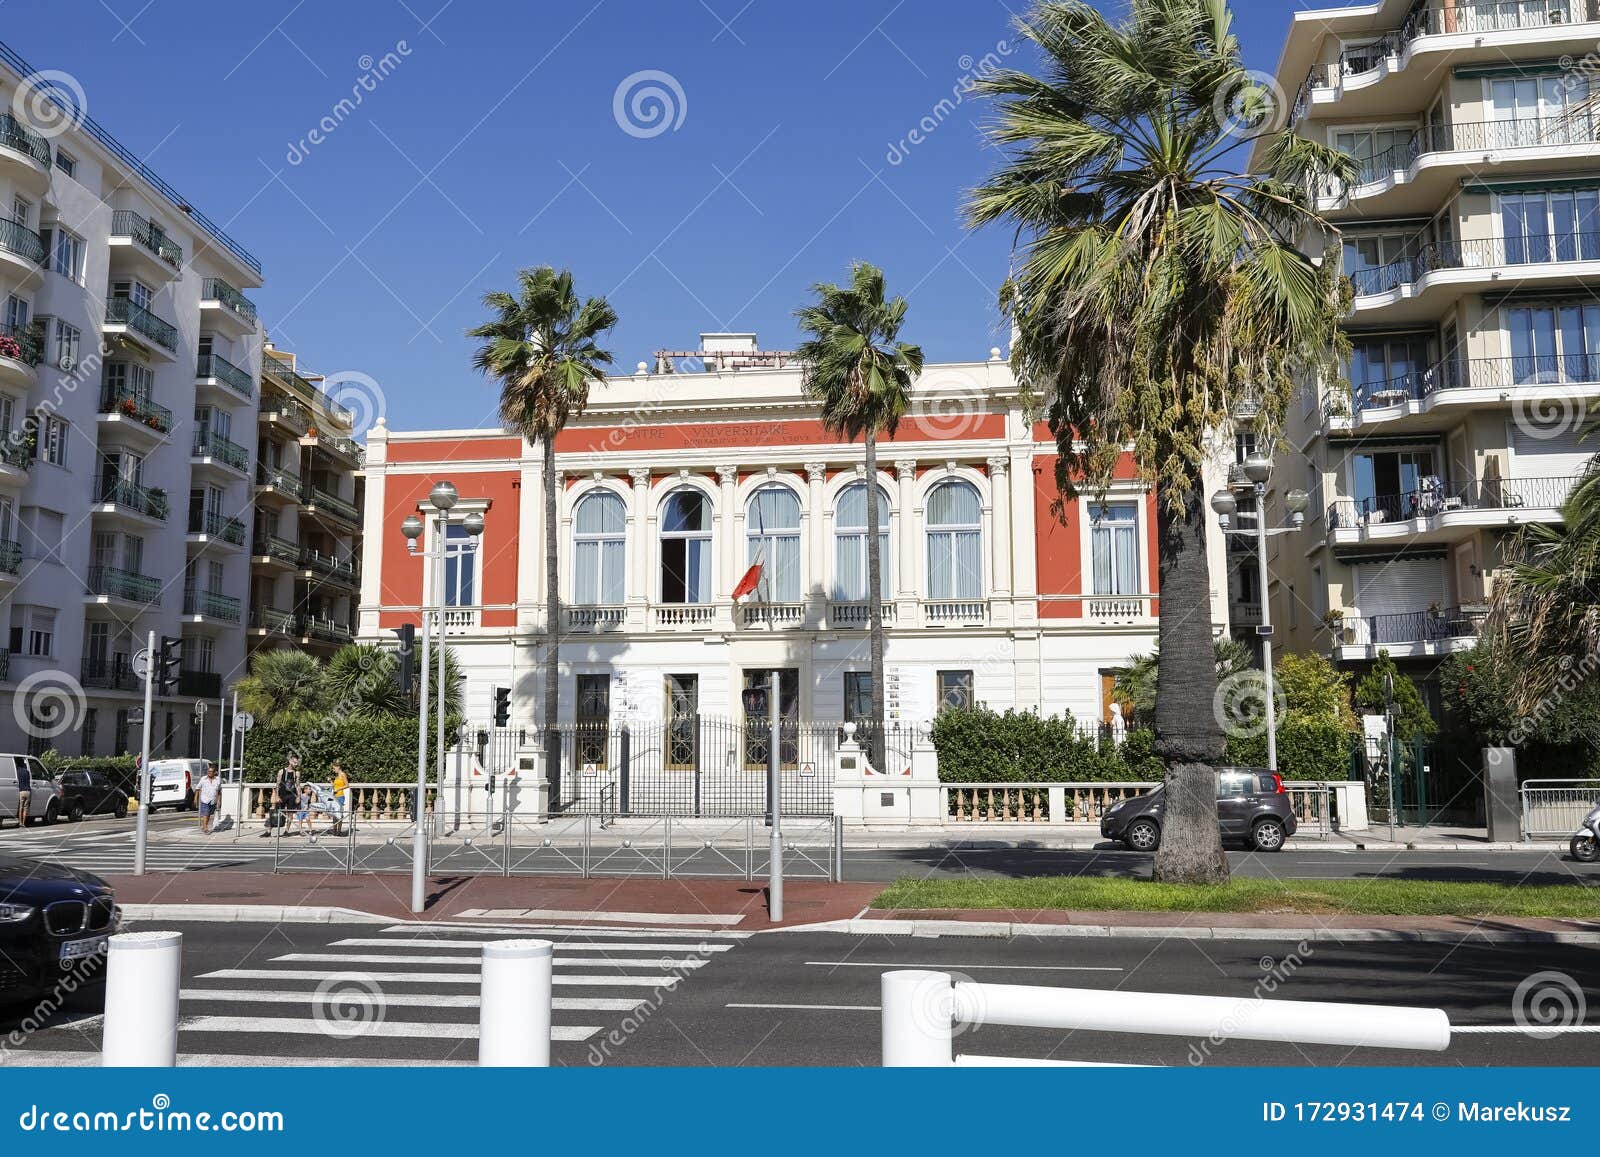 Two Storey Building Visible from the Street Side Editorial Stock Image 